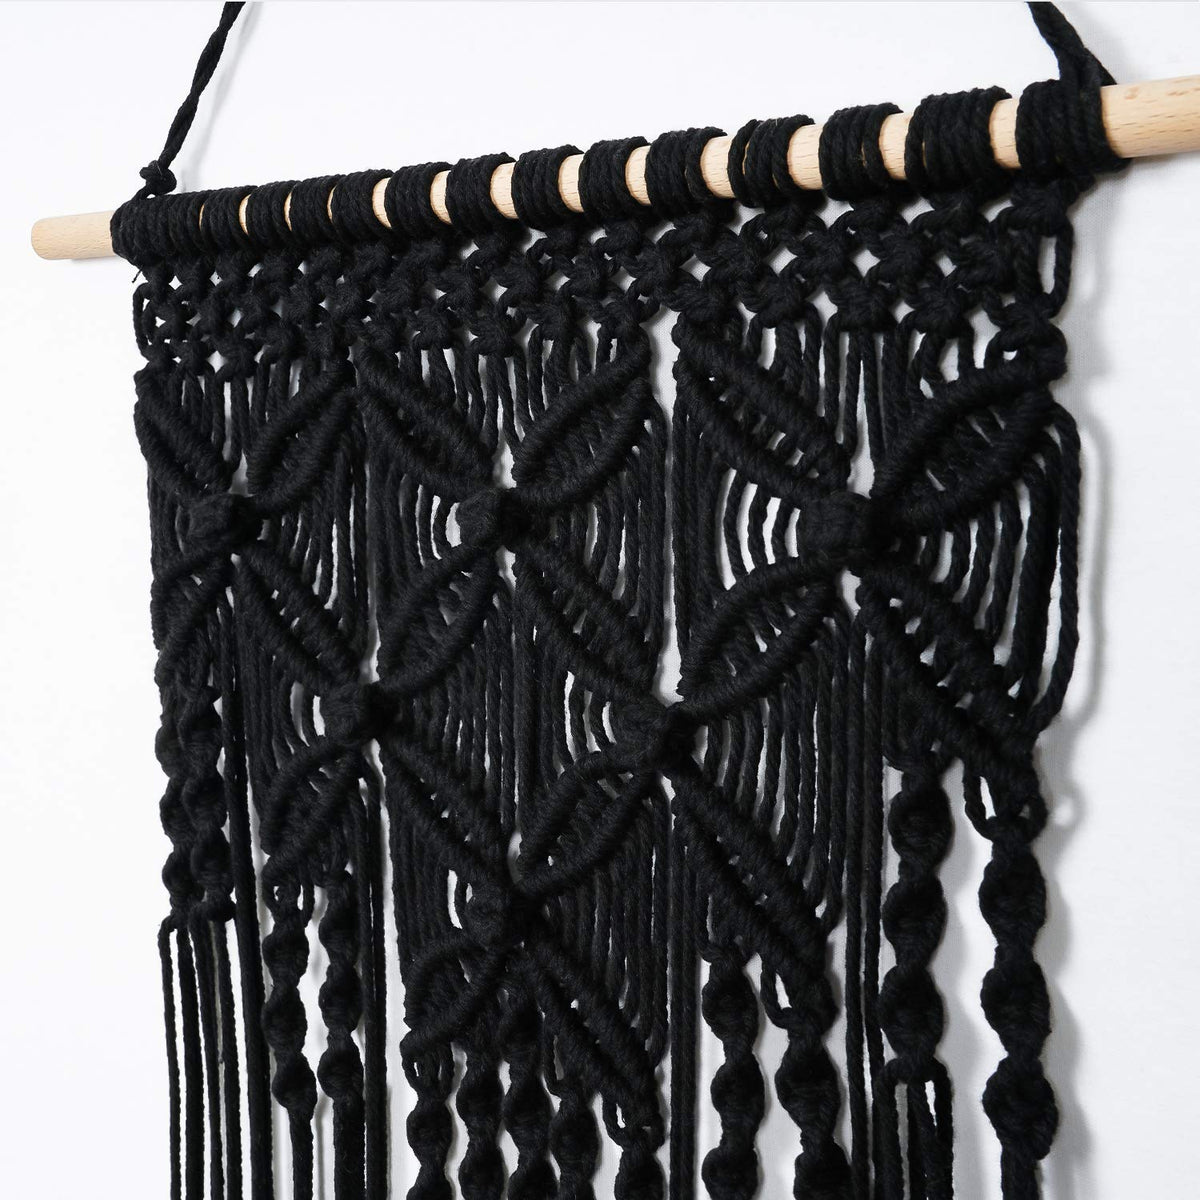  TIMEYARD Macrame Wall Hanging, Black and White Wall Art, Small  Woven Tapestry Boho Wall Decor for Bedroom Living Room Nursery Dorm Room  Gallery, 23'' L x 13'' W : Home 